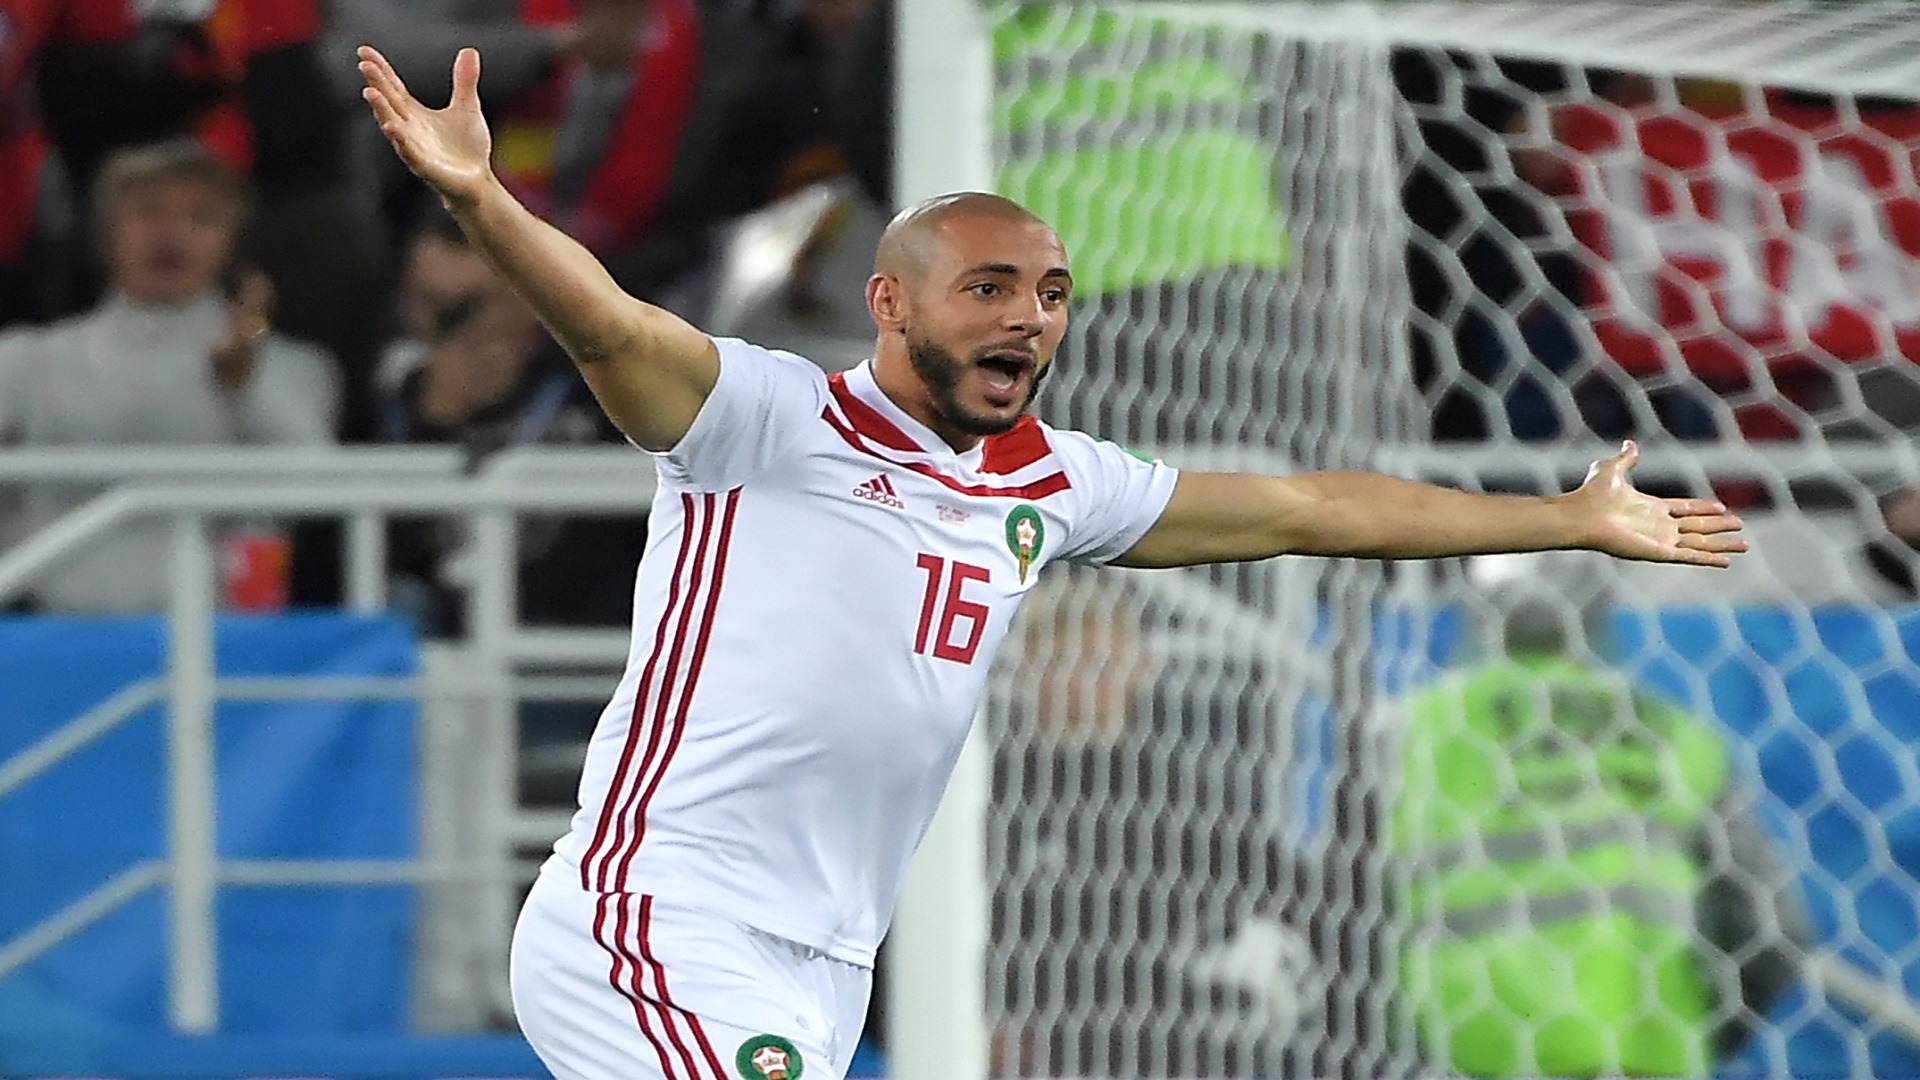 Morocco's forward Noureddine Amrabat gestures during the Russia 2018 World Cup Group B football match between Spain and Morocco at the Kaliningrad Stadium in Kaliningrad on June 25, 2018. (Photo by Patrick HERTZOG / AFP) / RESTRICTED TO EDITORIAL USE - NO MOBILE PUSH ALERTS/DOWNLOADS (Photo credit should read PATRICK HERTZOG/AFP/Getty Images)